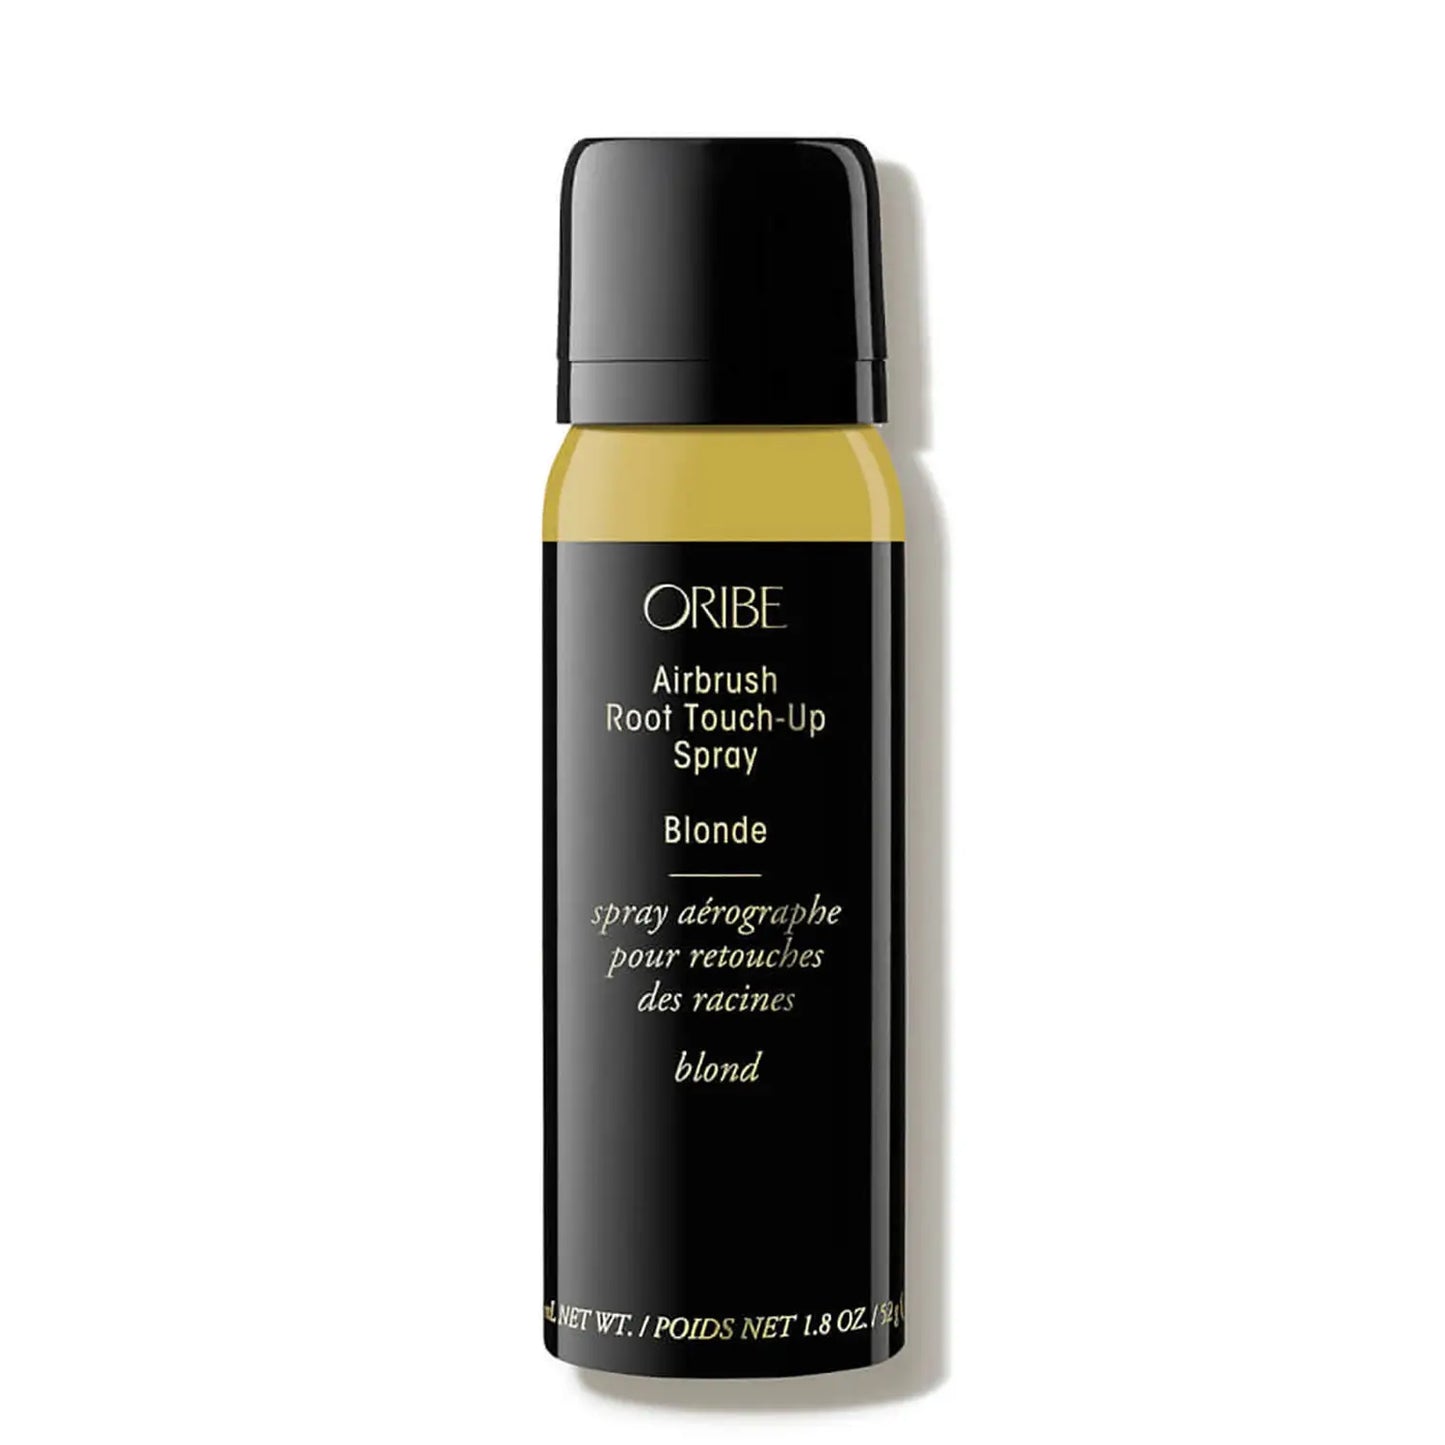 ORIBE Root touch-up spray (Blonde)